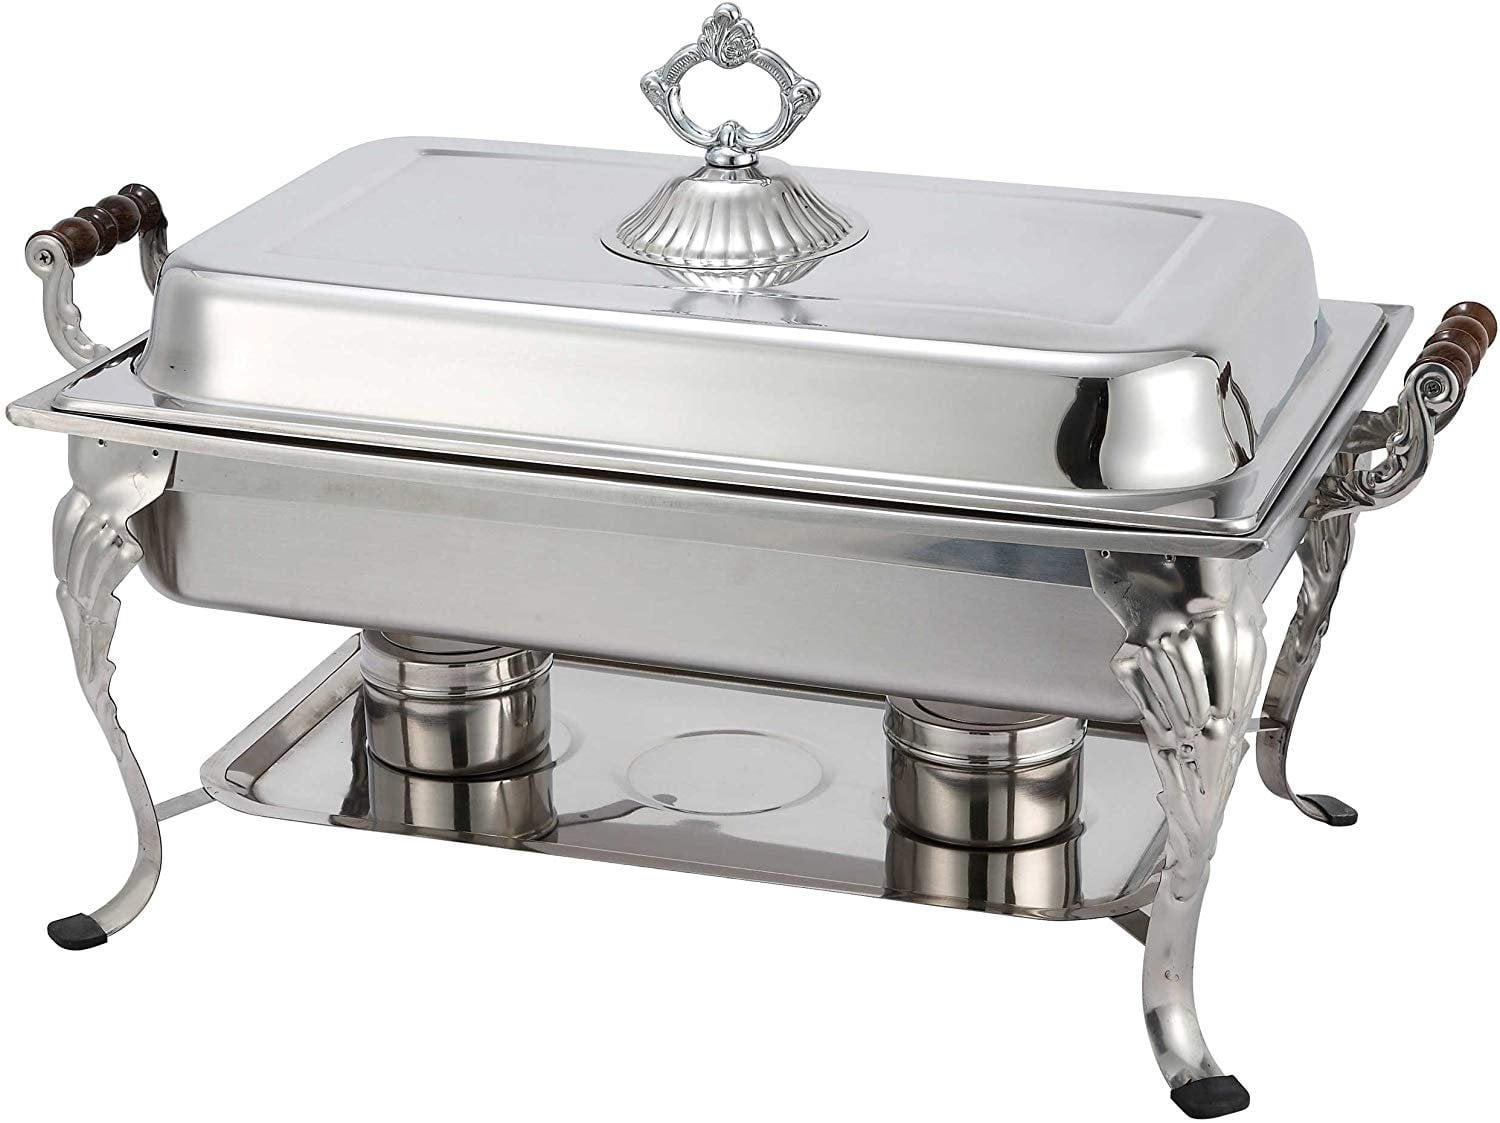 Set of 3 6-Quart Chafing Dish for Catering Winco 708 Round Crown Chafer 